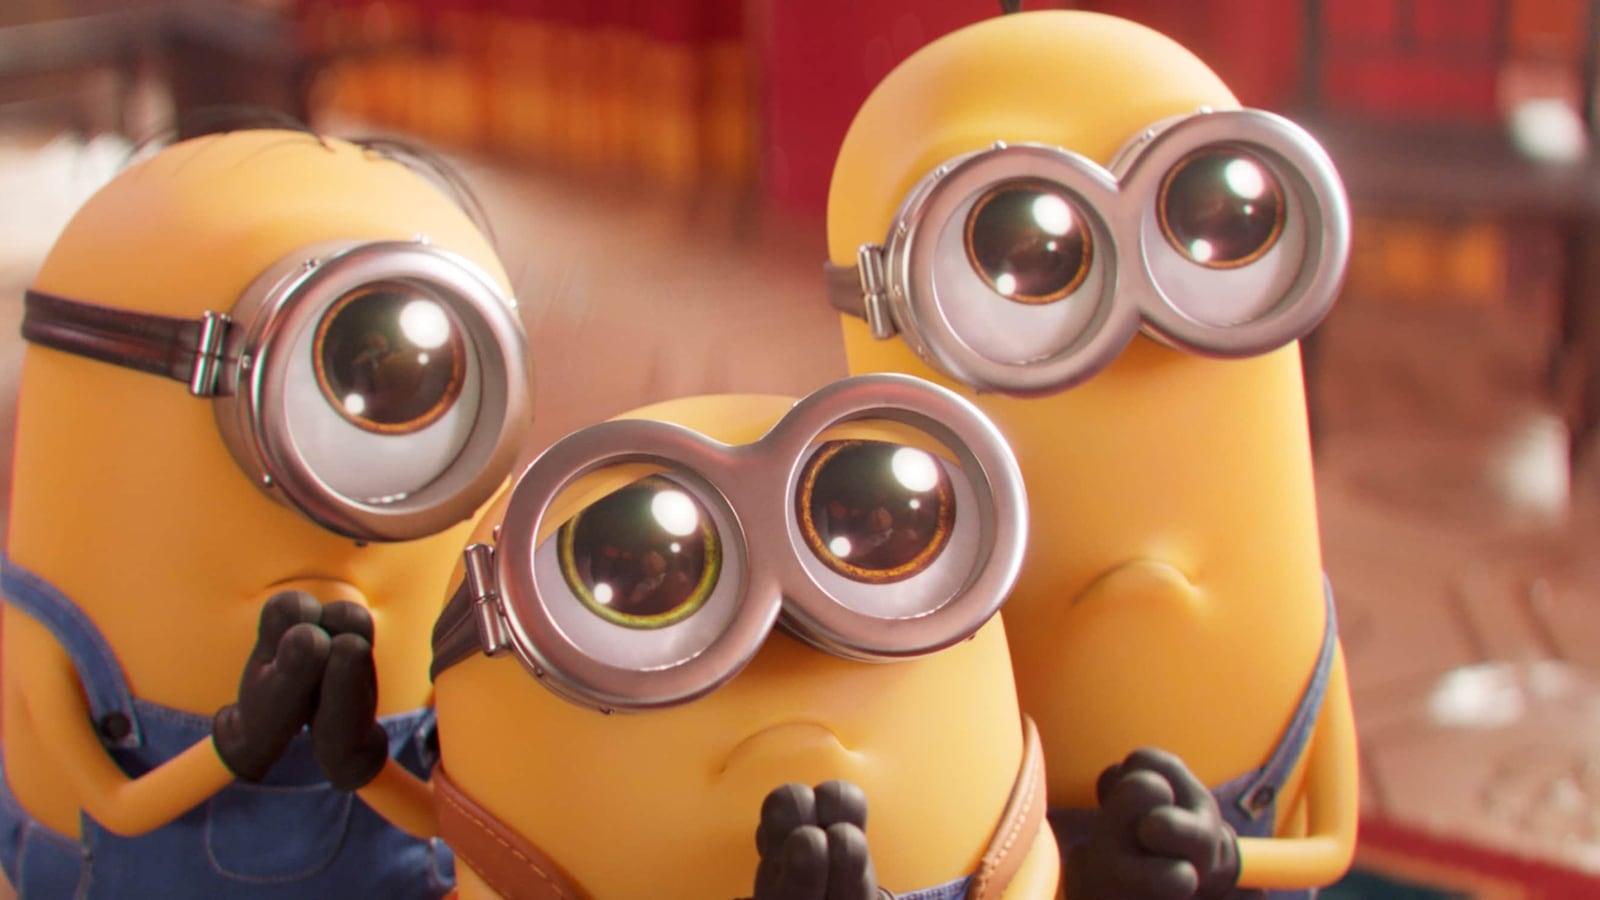 Minions The Rise of Grus ending changed in China